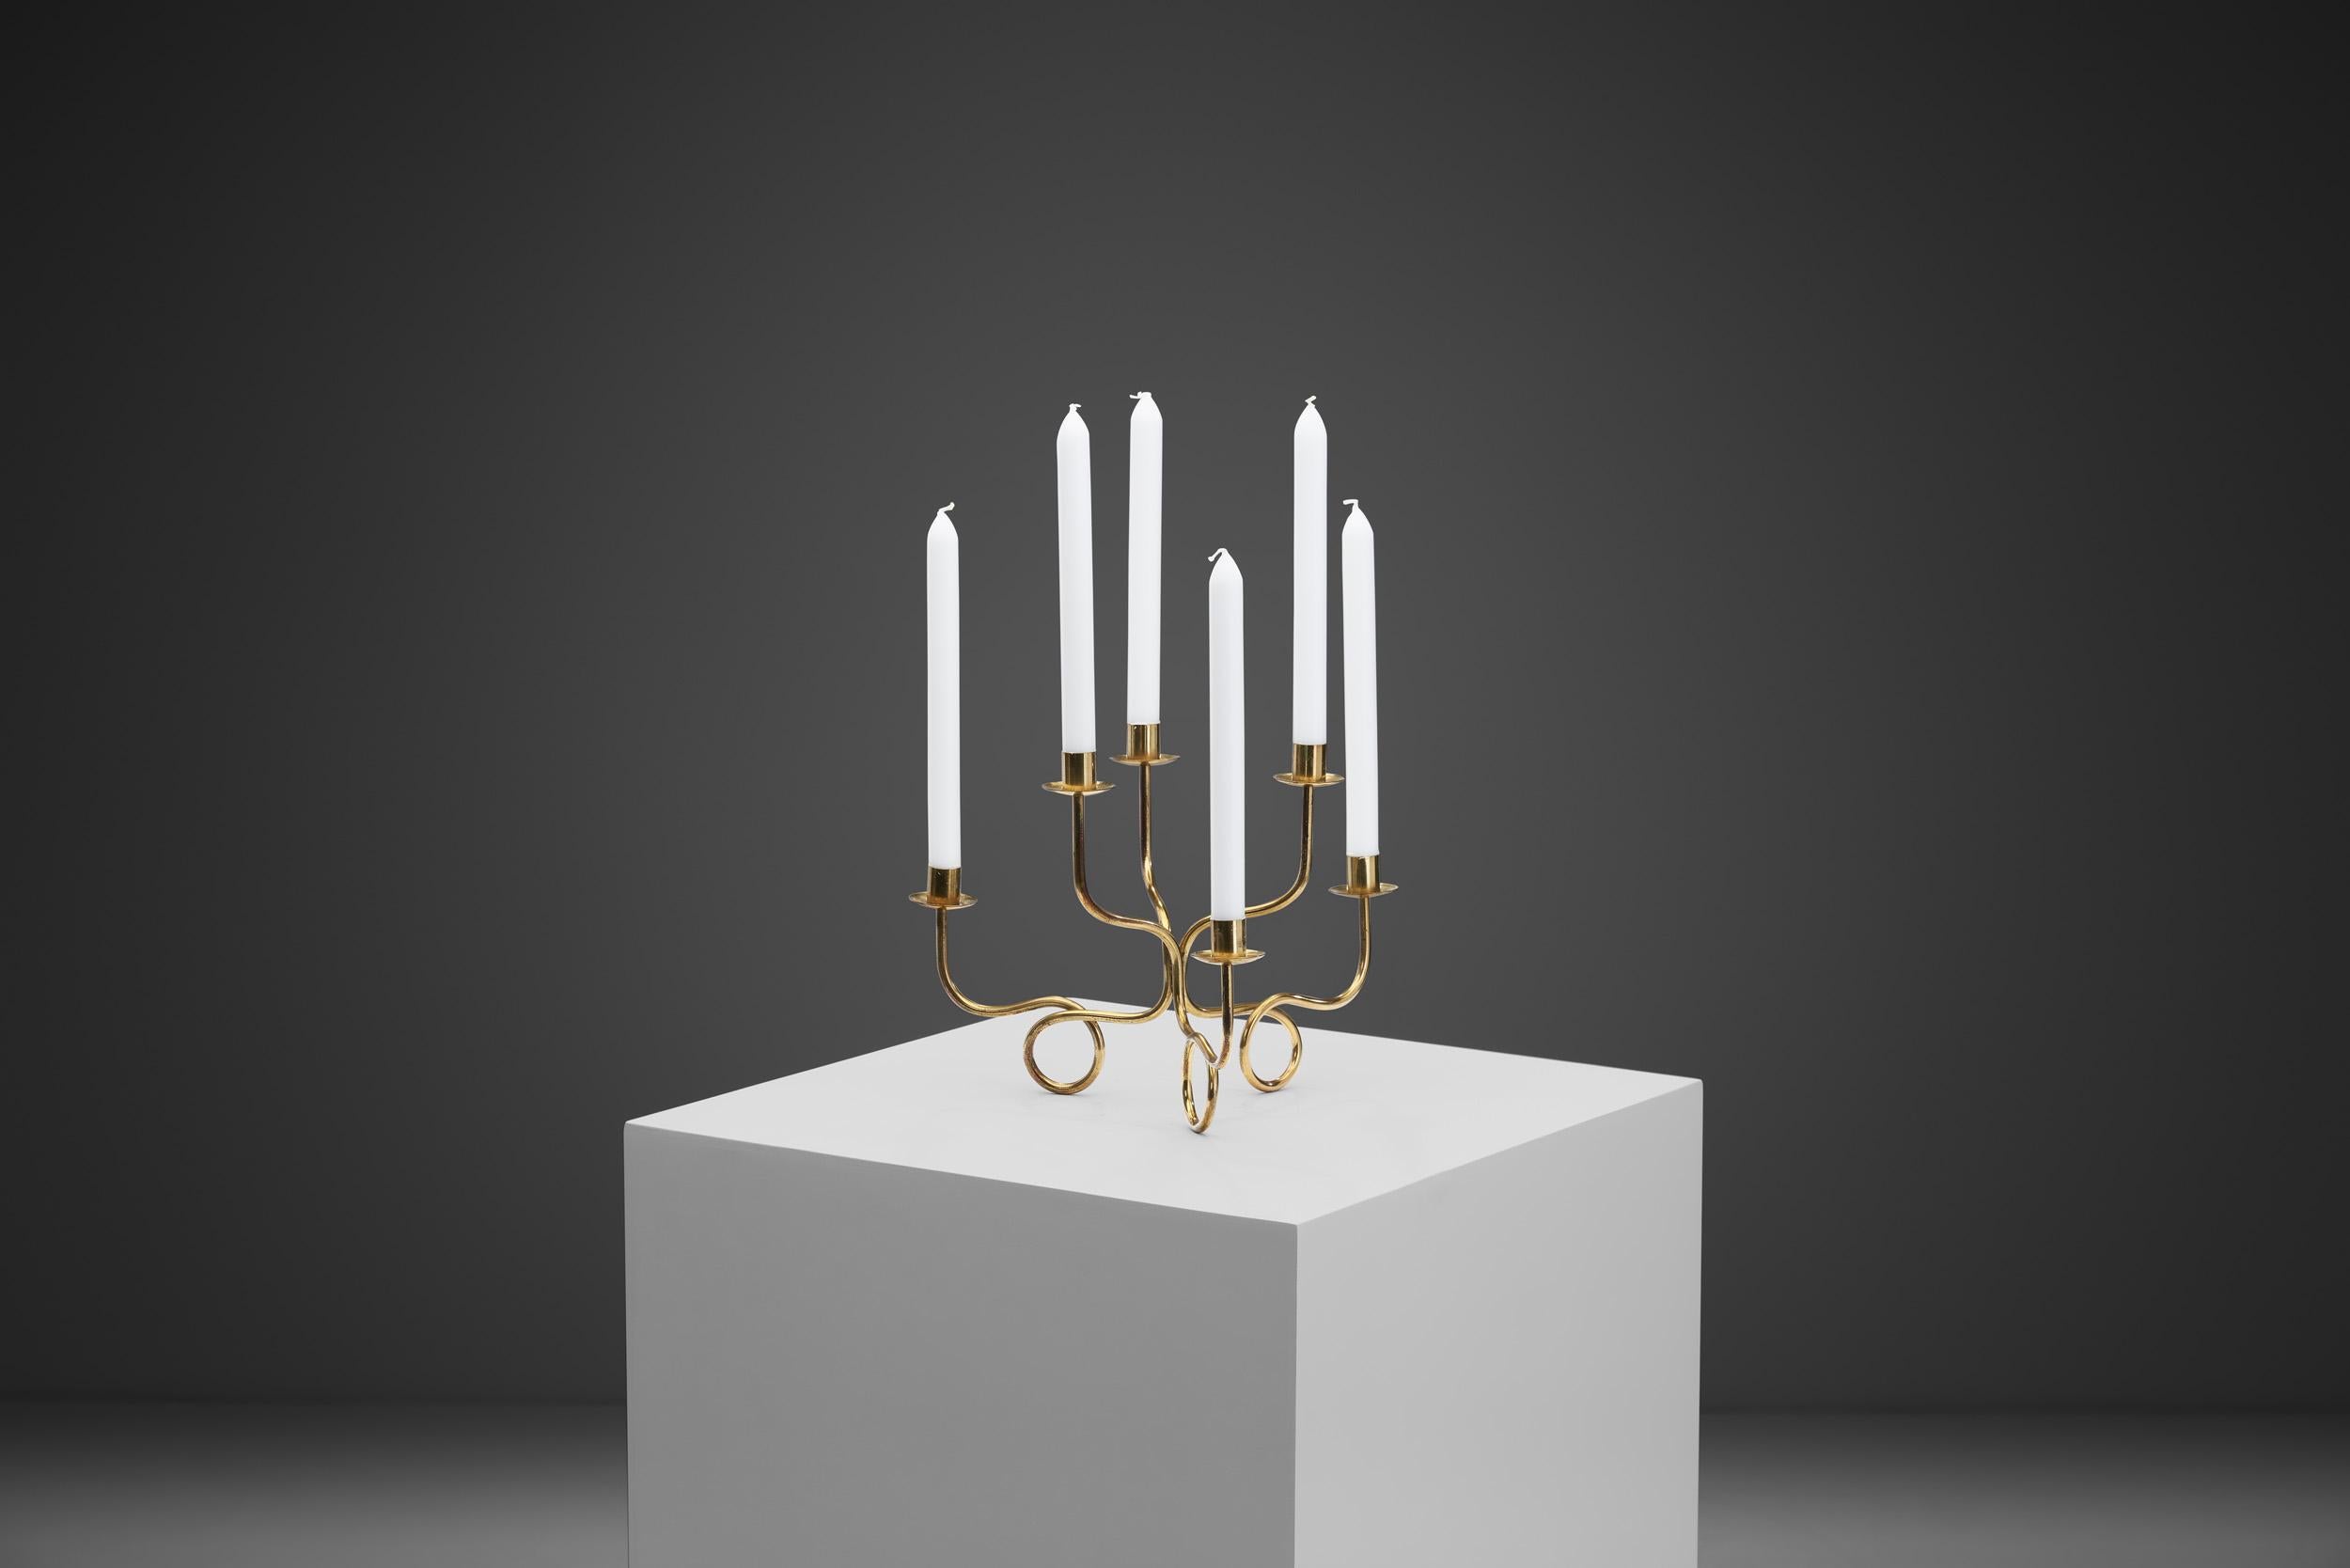 In 1934, Josef Frank made his first attempt at modernizing the classic candelabra. With softly swaying forms, he eliminated the base in the middle, placing the branches of this model directly on the tabletop. This candelabra emits a pleasant light